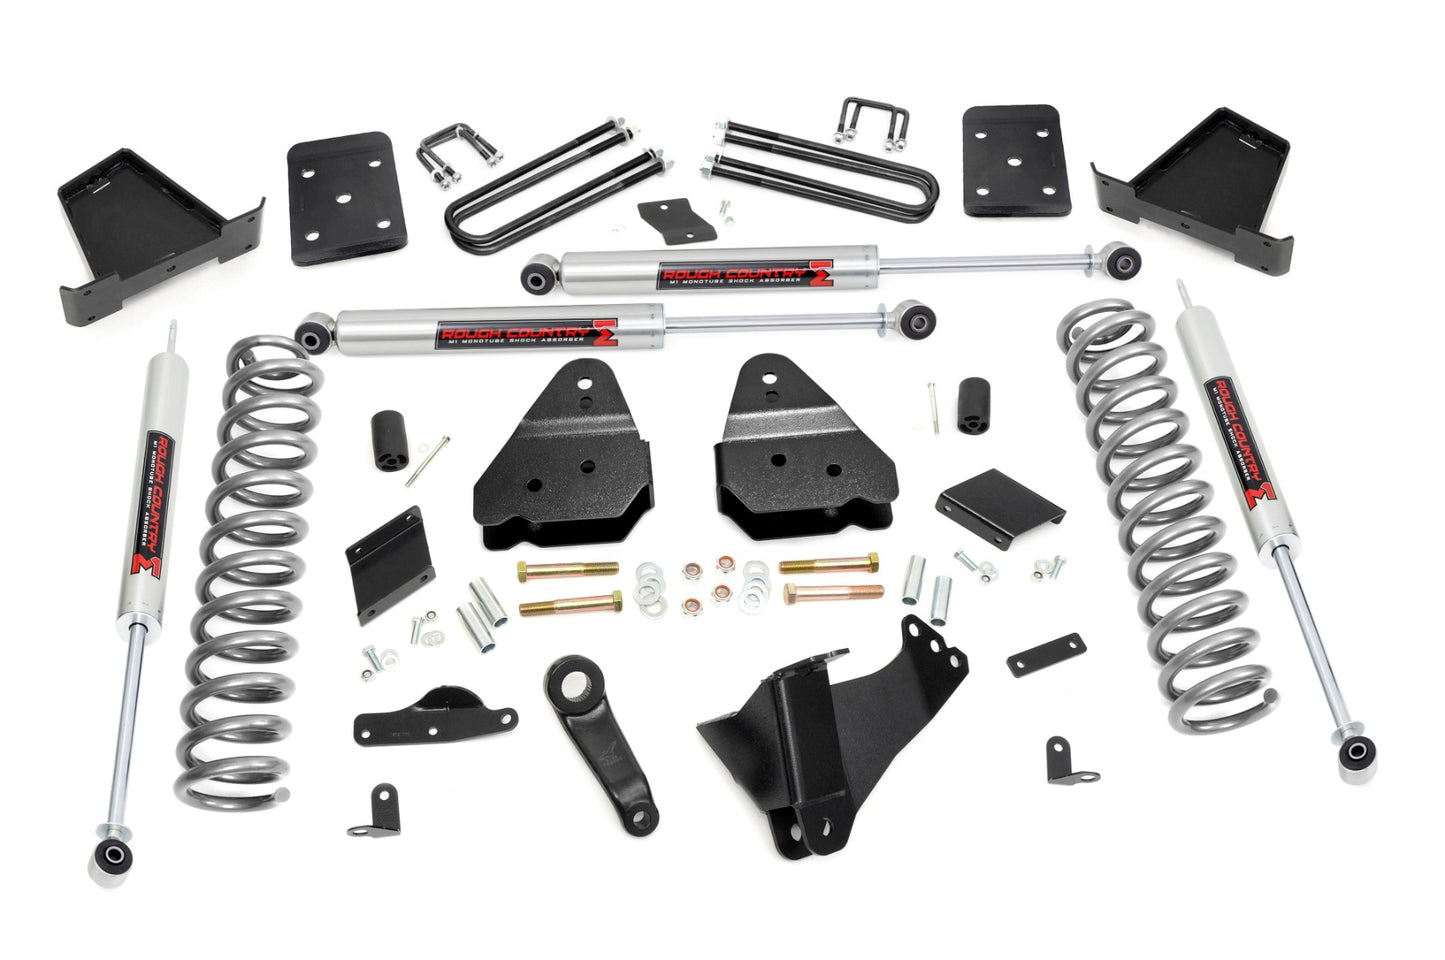 Rough Country (55140) 6 Inch Lift Kit | Diesel | No OVLD | M1 | Ford F-250 Super Duty 4WD (15-16)